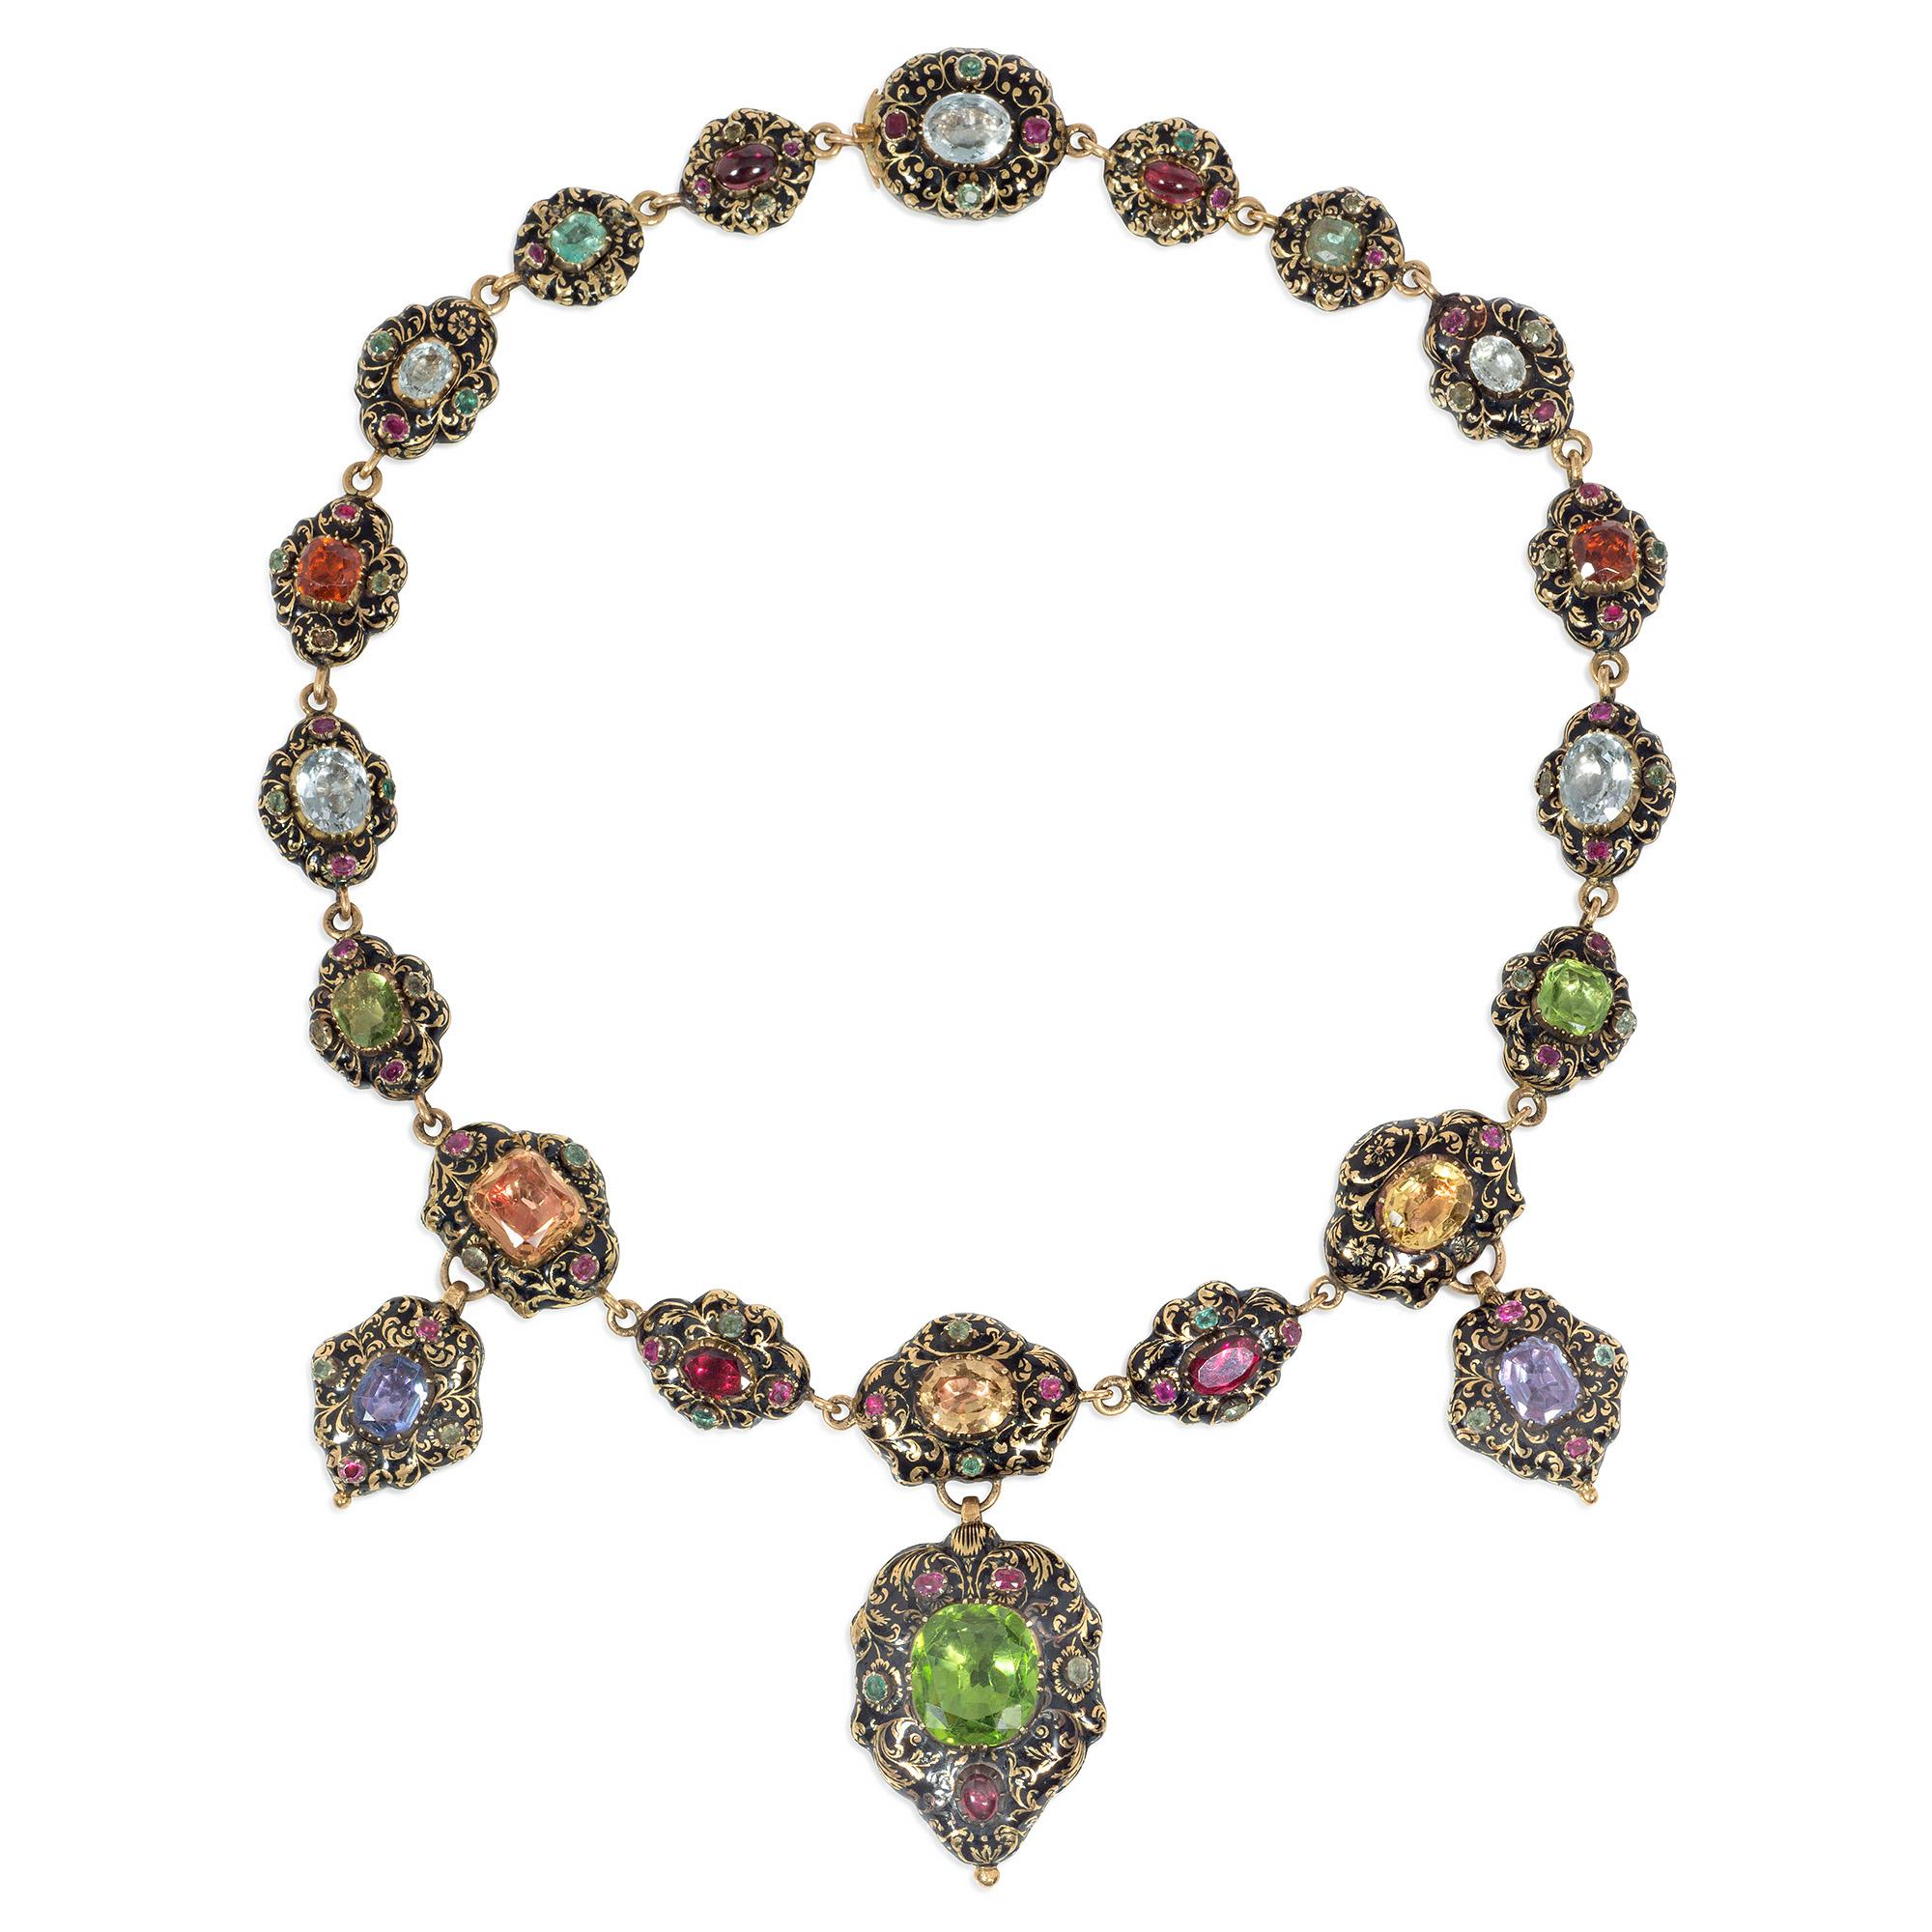 A highly important Georgian Swiss enamel, gold, and multi-gemstone necklace with pendant elements, in 18k.  The elaborately decorated links are set with topaz, peridots, garnets, sapphires, emeralds, and rubies and feature scrolled foliate patterns